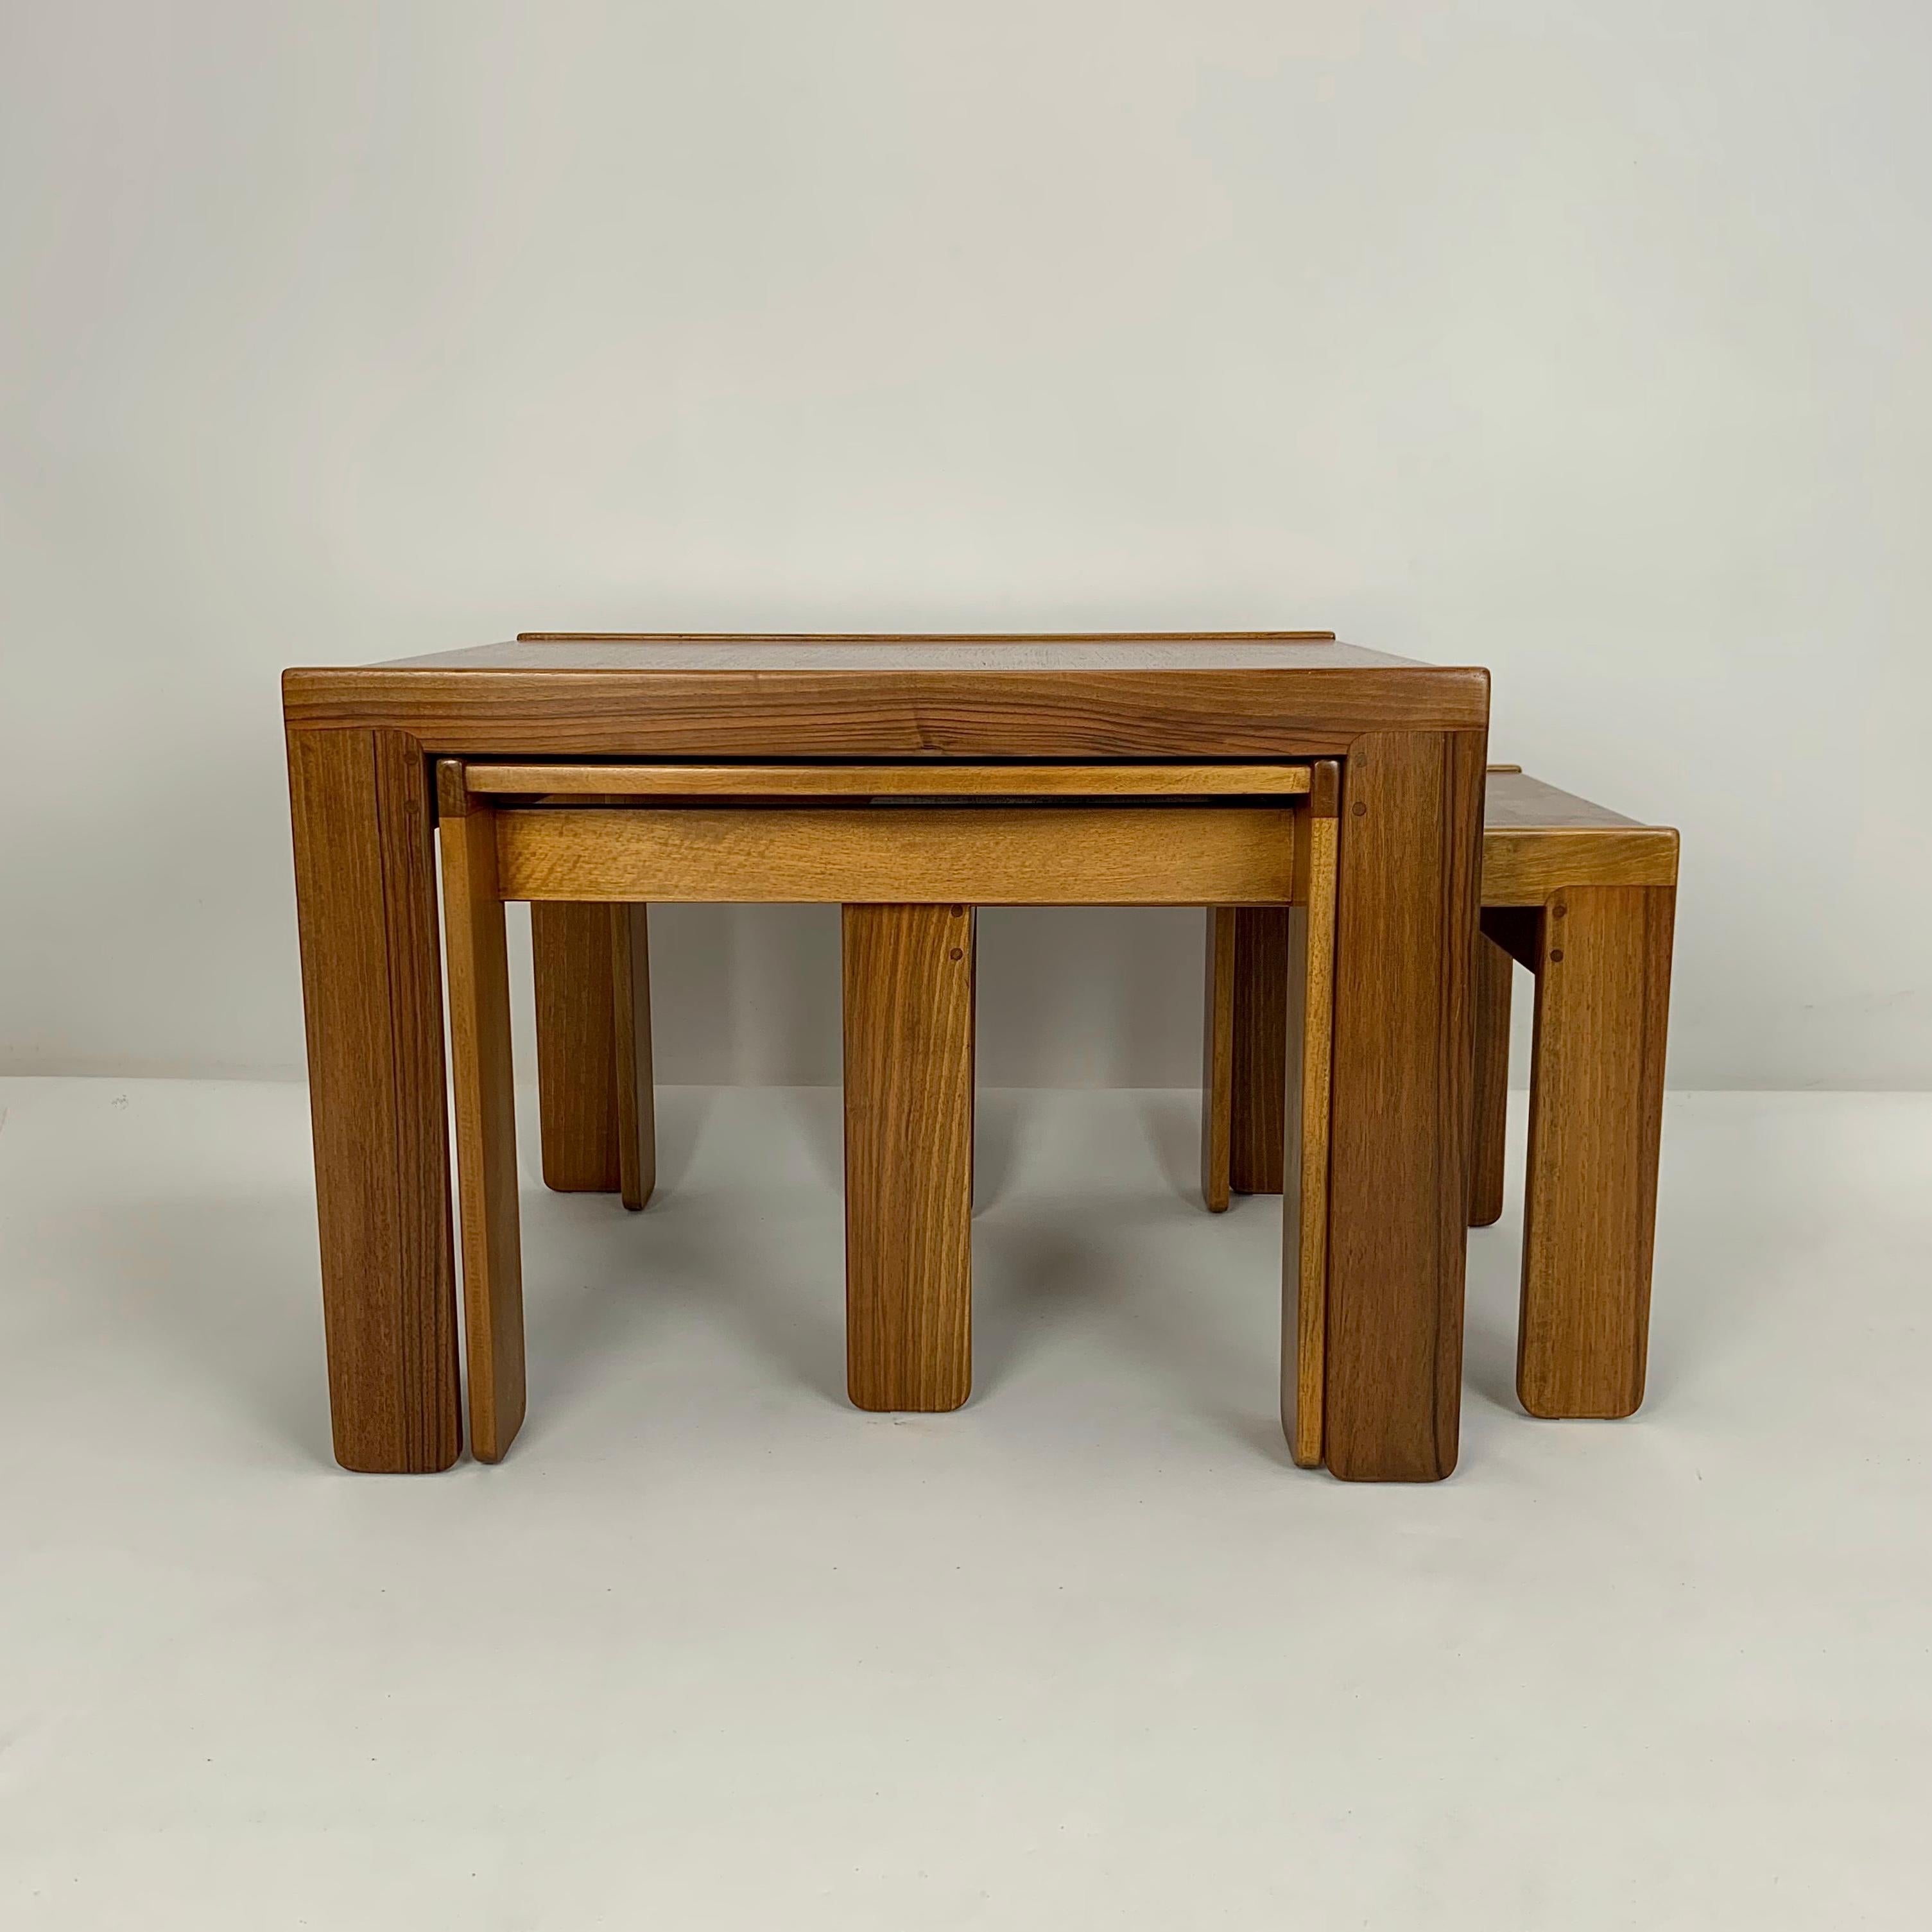 Wood Scarpa Afra & Tobia Nesting Tables 777 Model for Cassina, circa 1960, Italy.